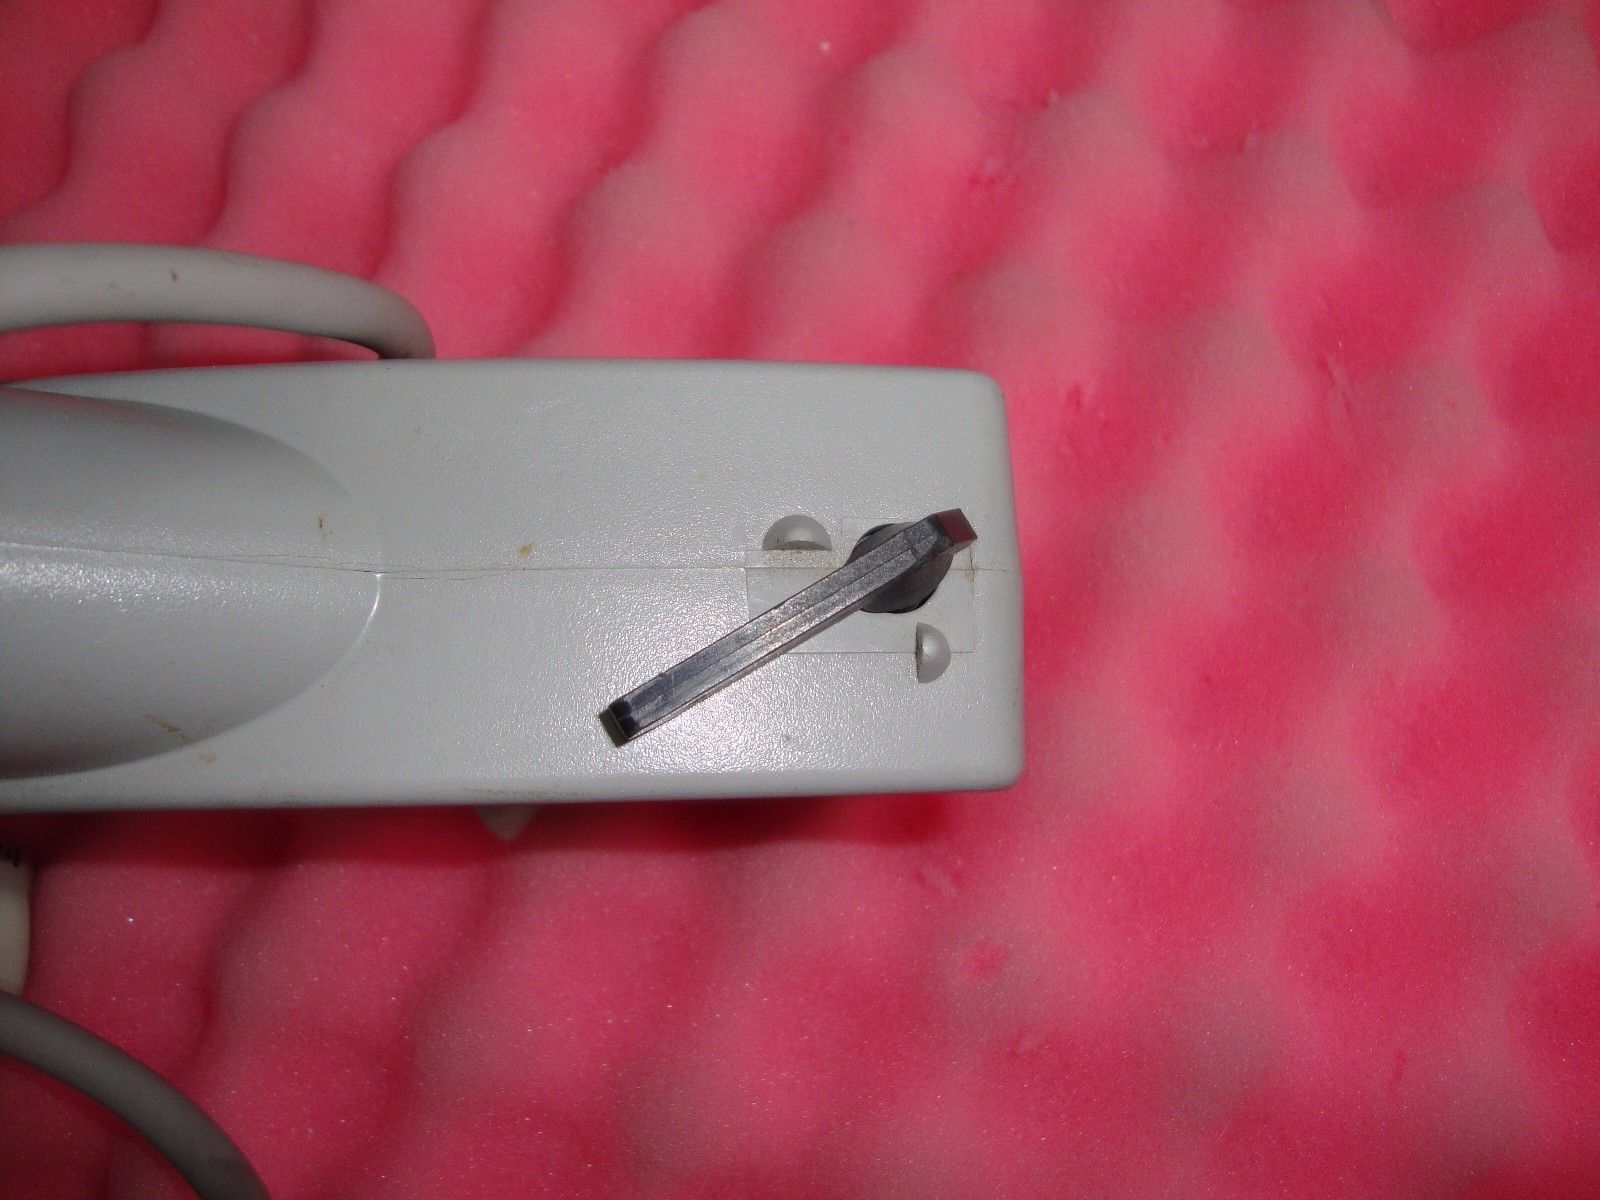 a white electrical device with a small piece of wire sticking out of it